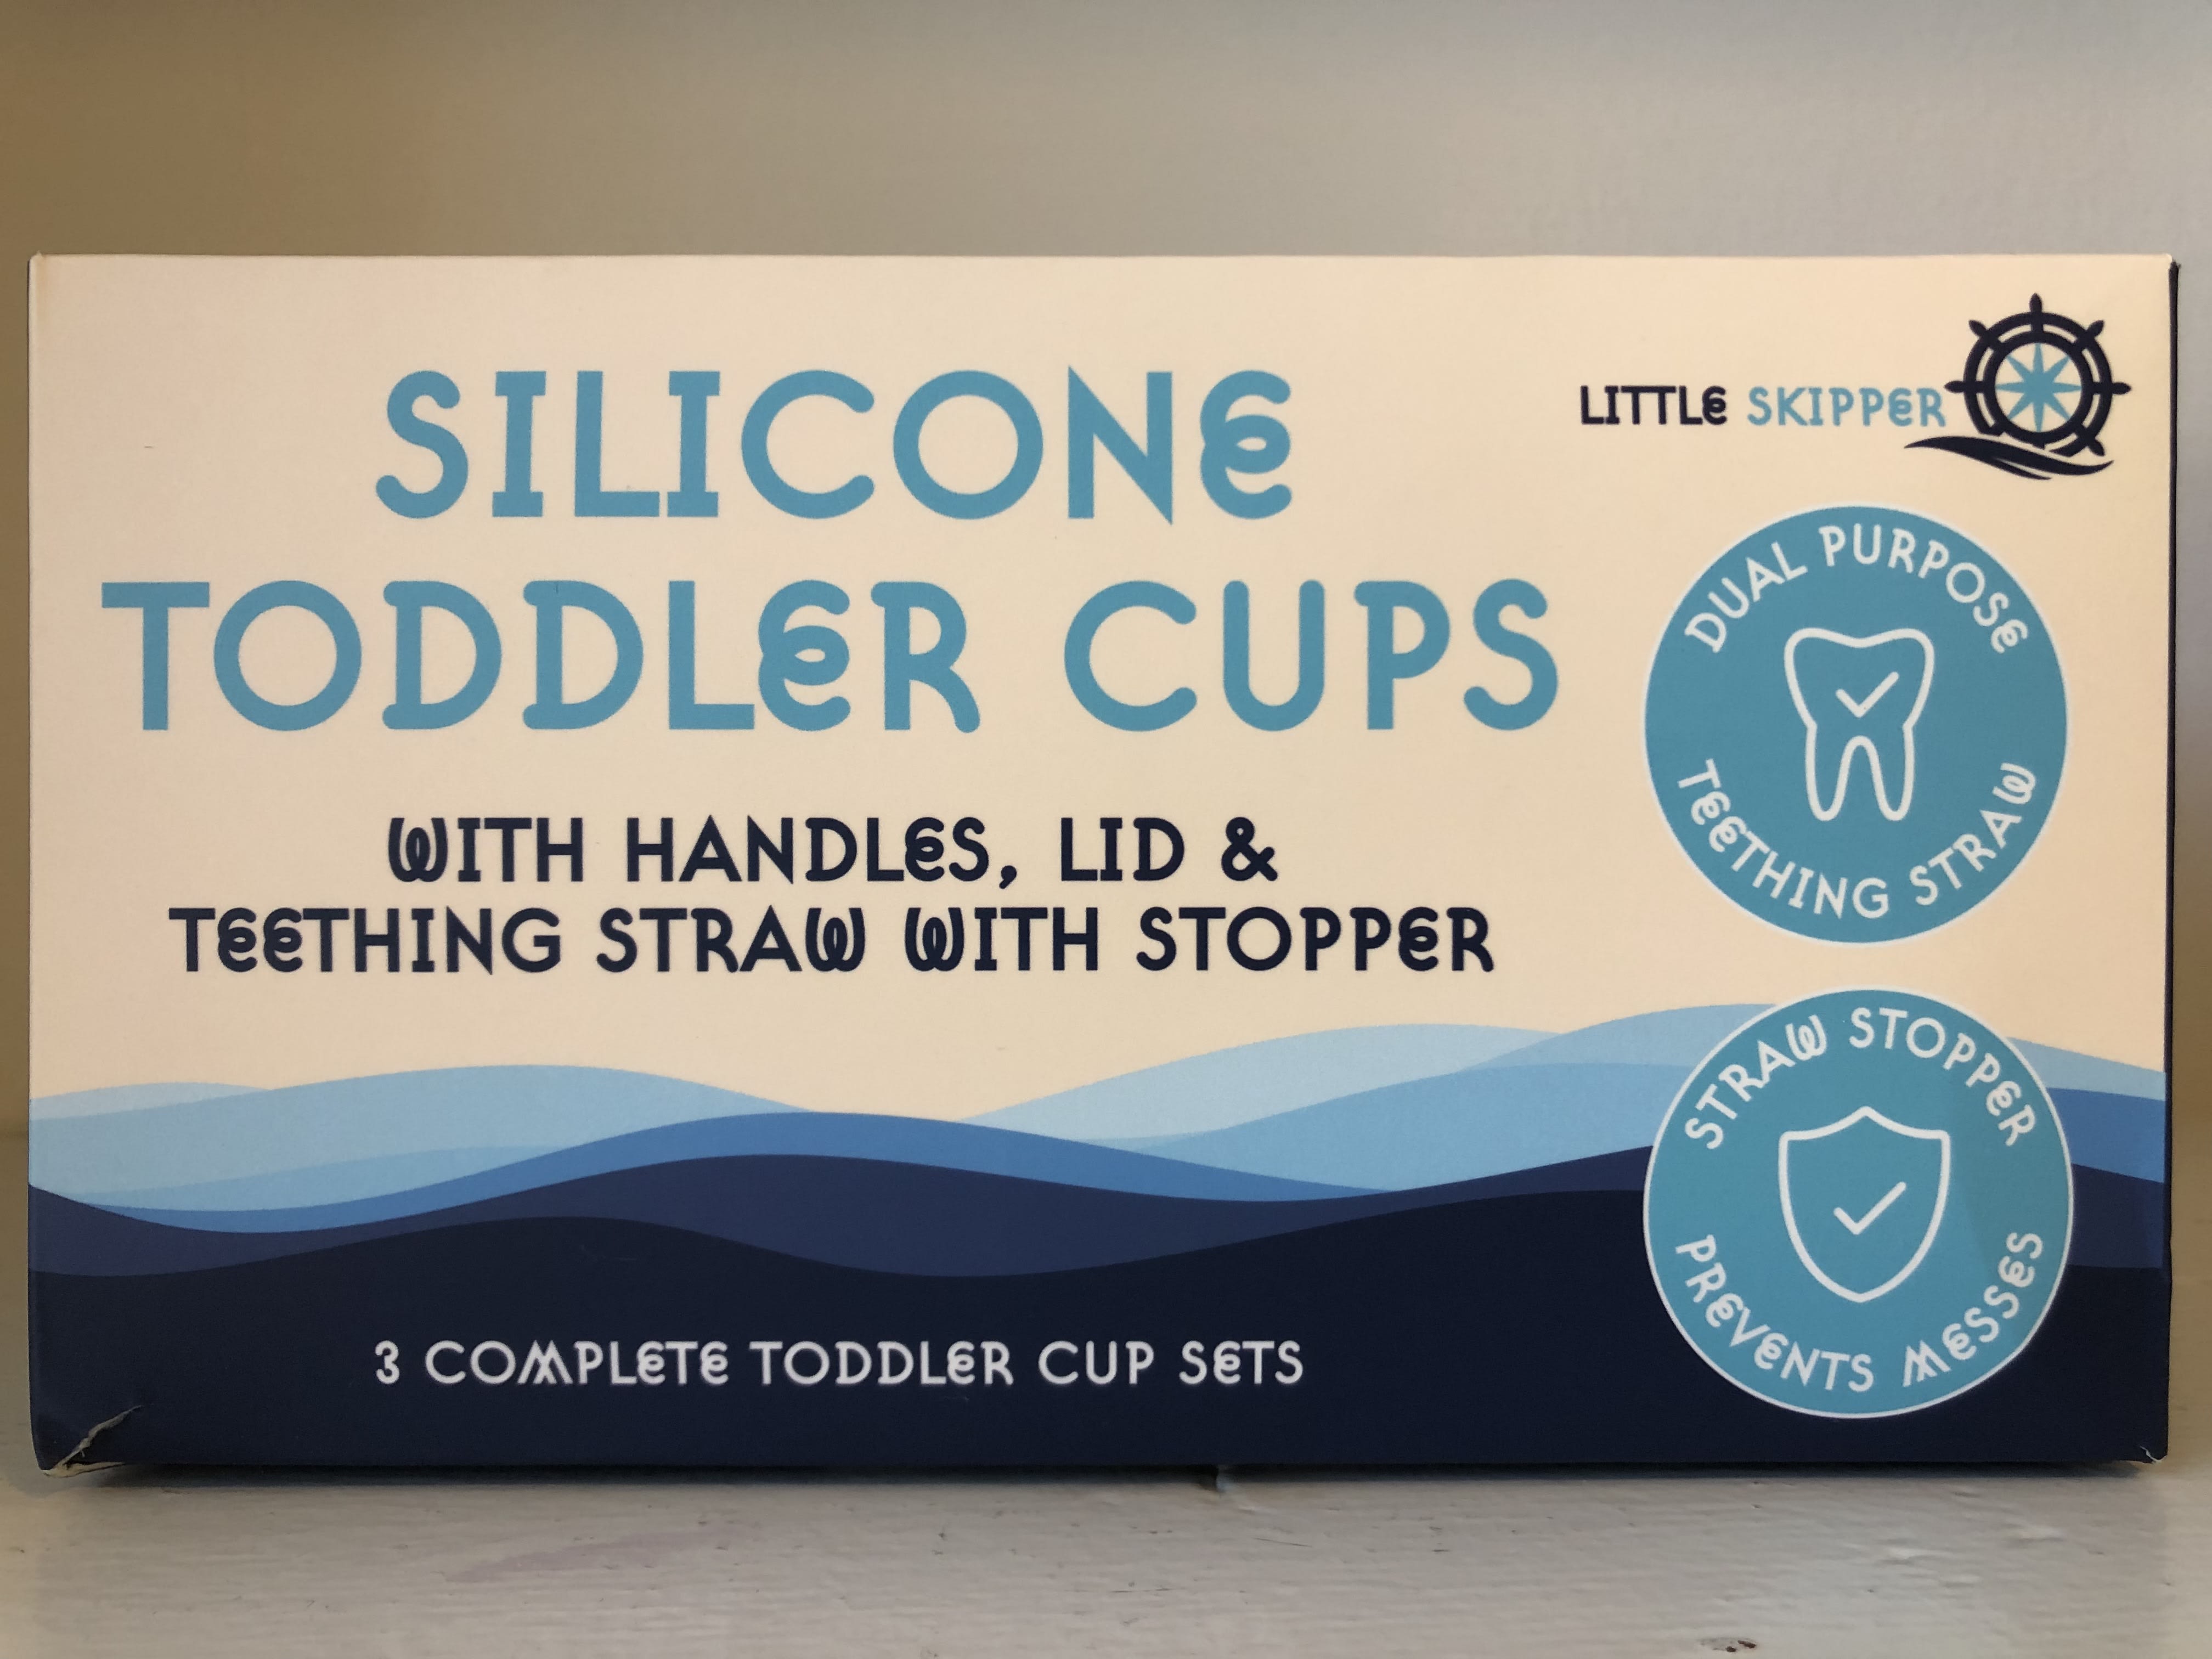 LITTLE SKIPPER Silicone Toddler Cups With Dual Purpose Drinking